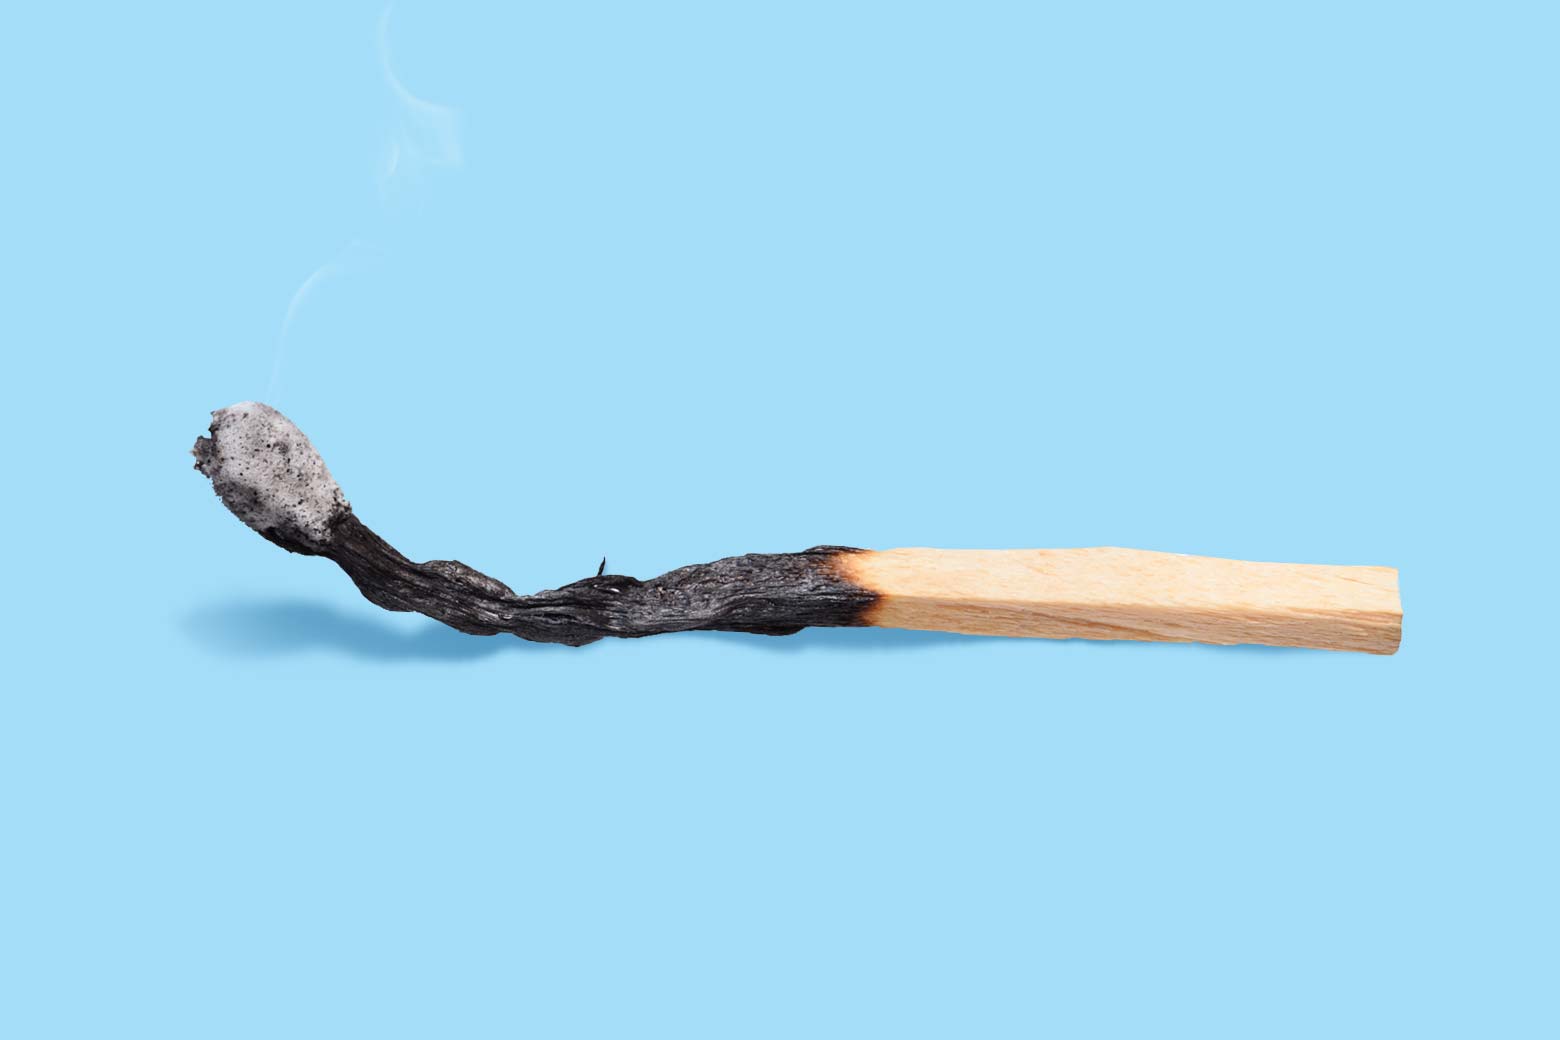 Photo illustration of a burnt match against a blue background.